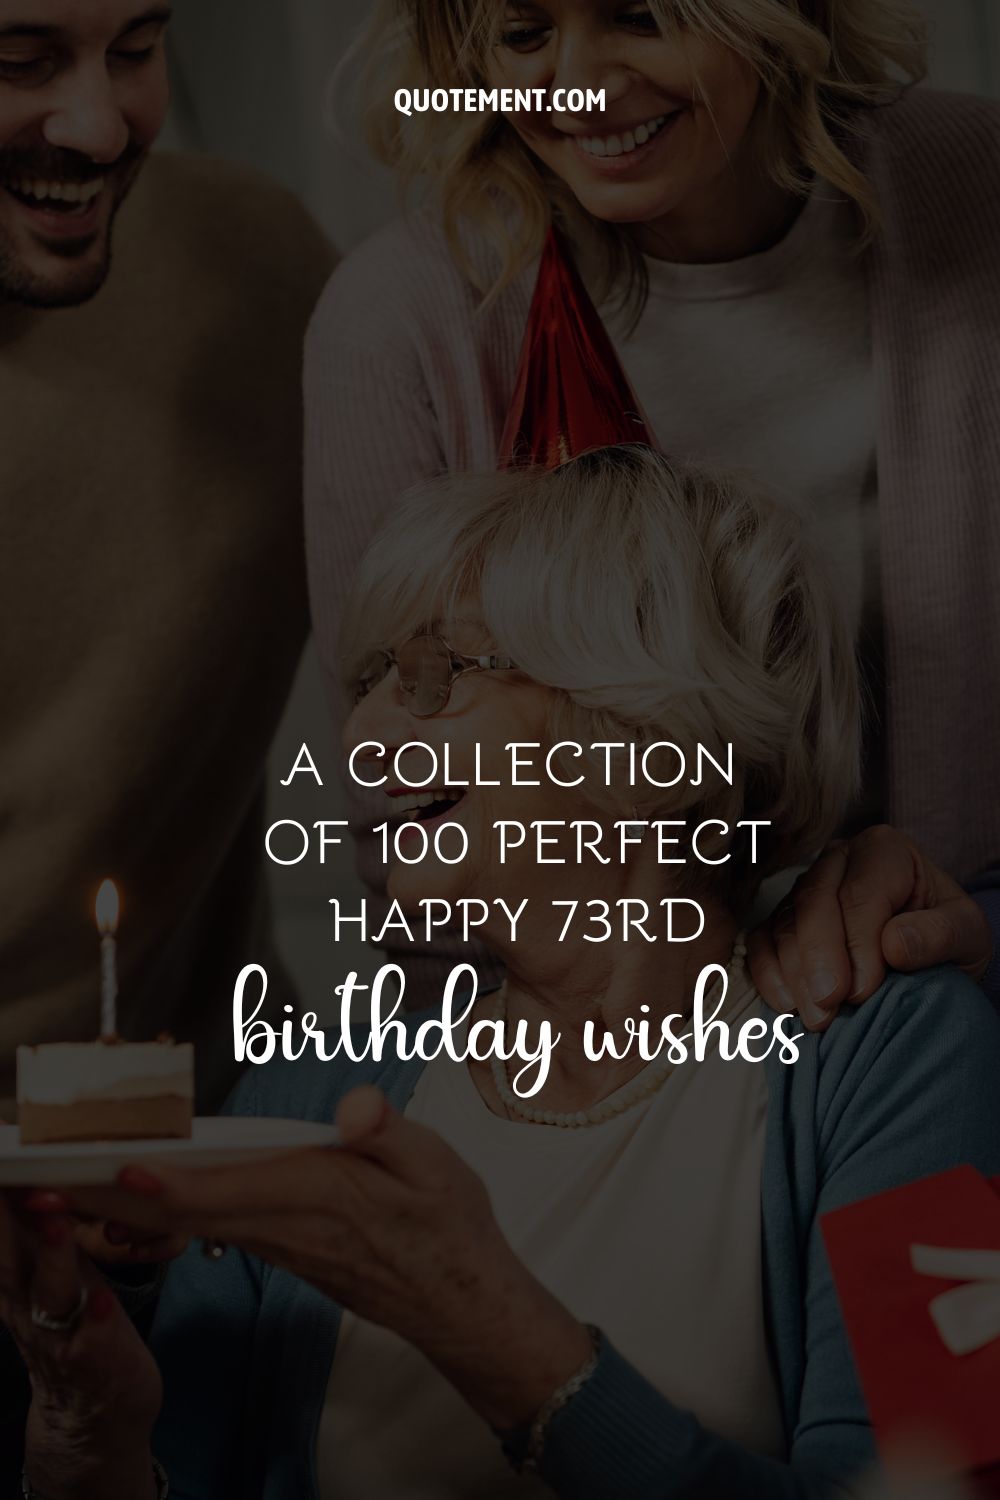 A Collection Of 100 Perfect Happy 73rd Birthday Wishes